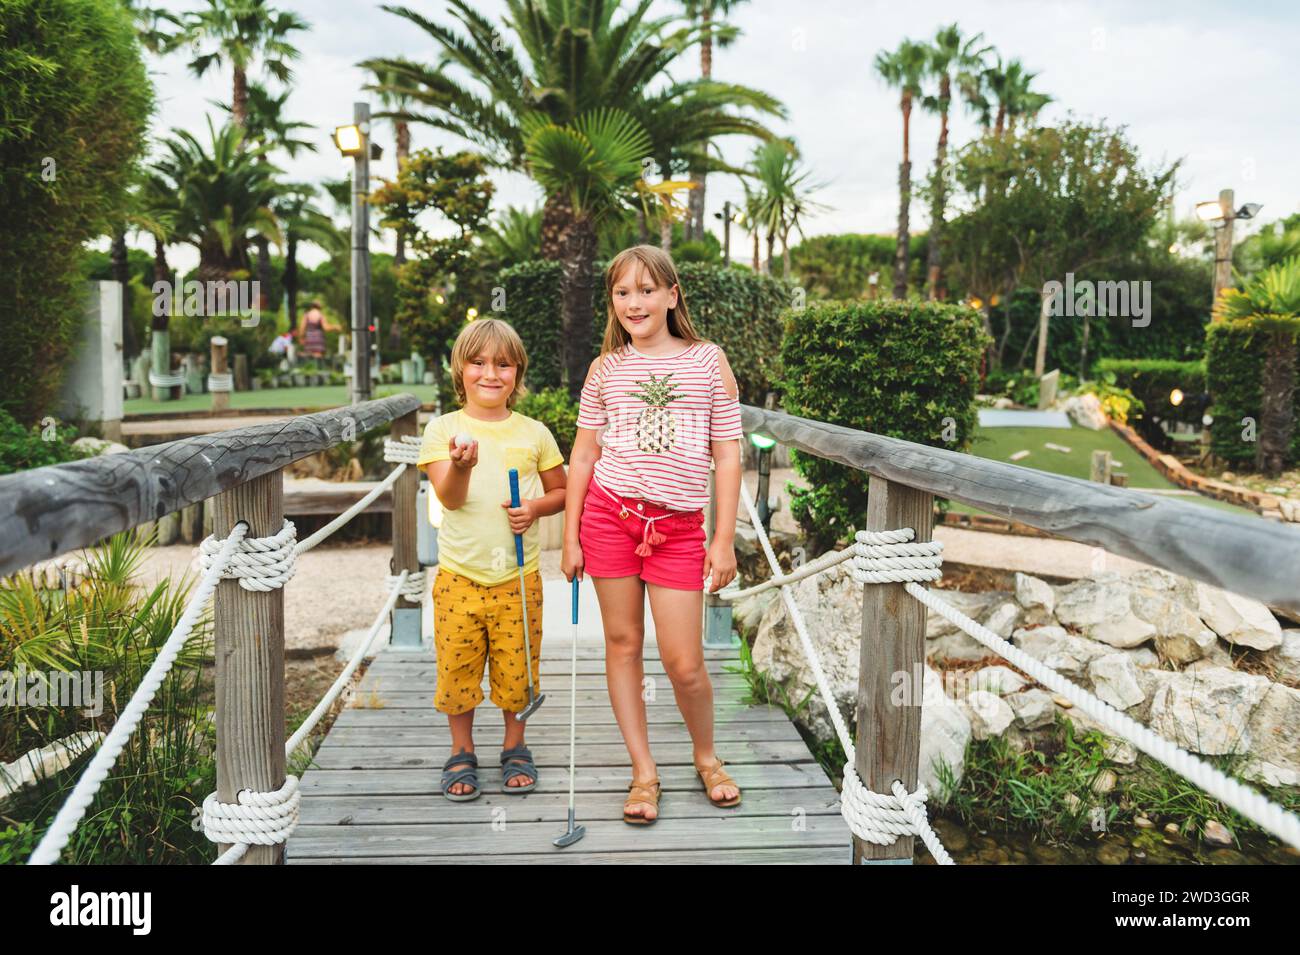 Group of two funny kids playing mini golf, children enjoying summer vacation Stock Photo